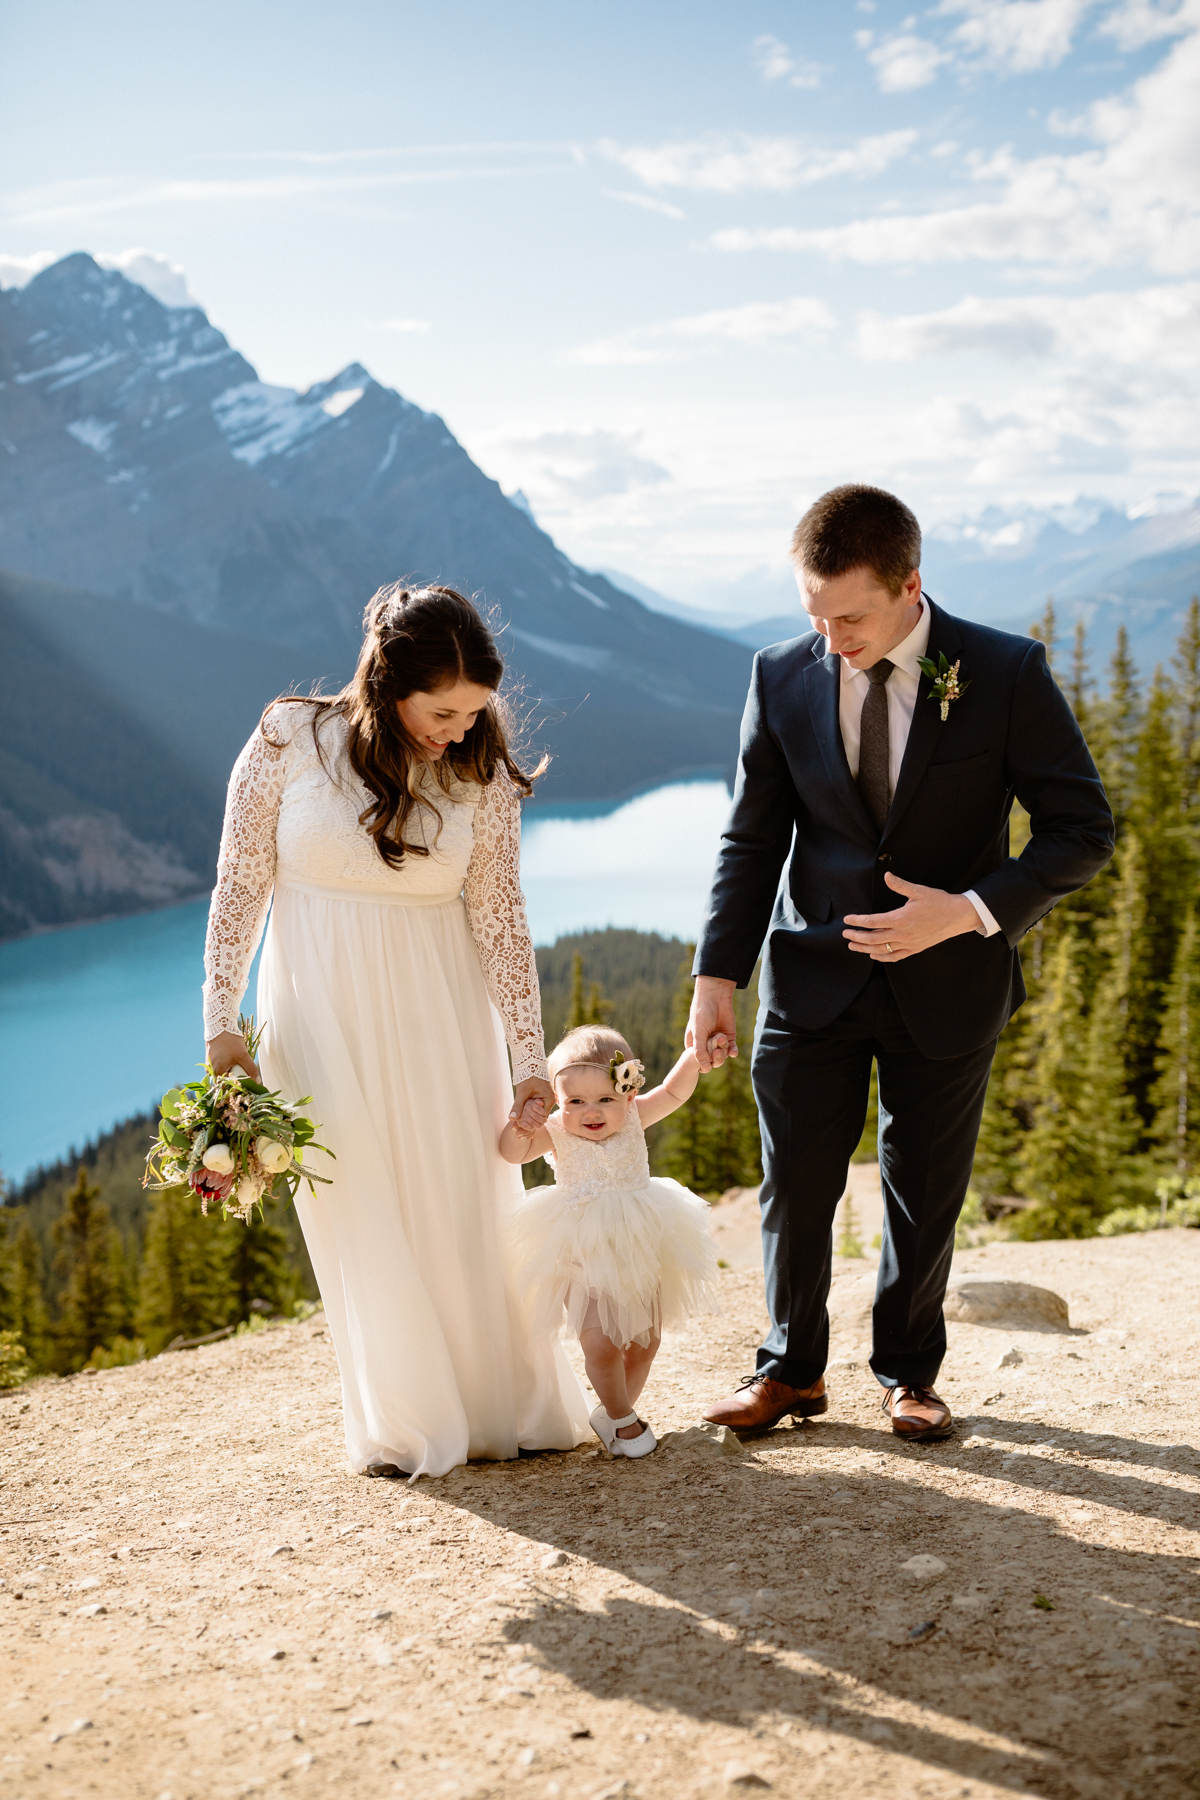 Vow Renewal Photography in Banff - Image 17